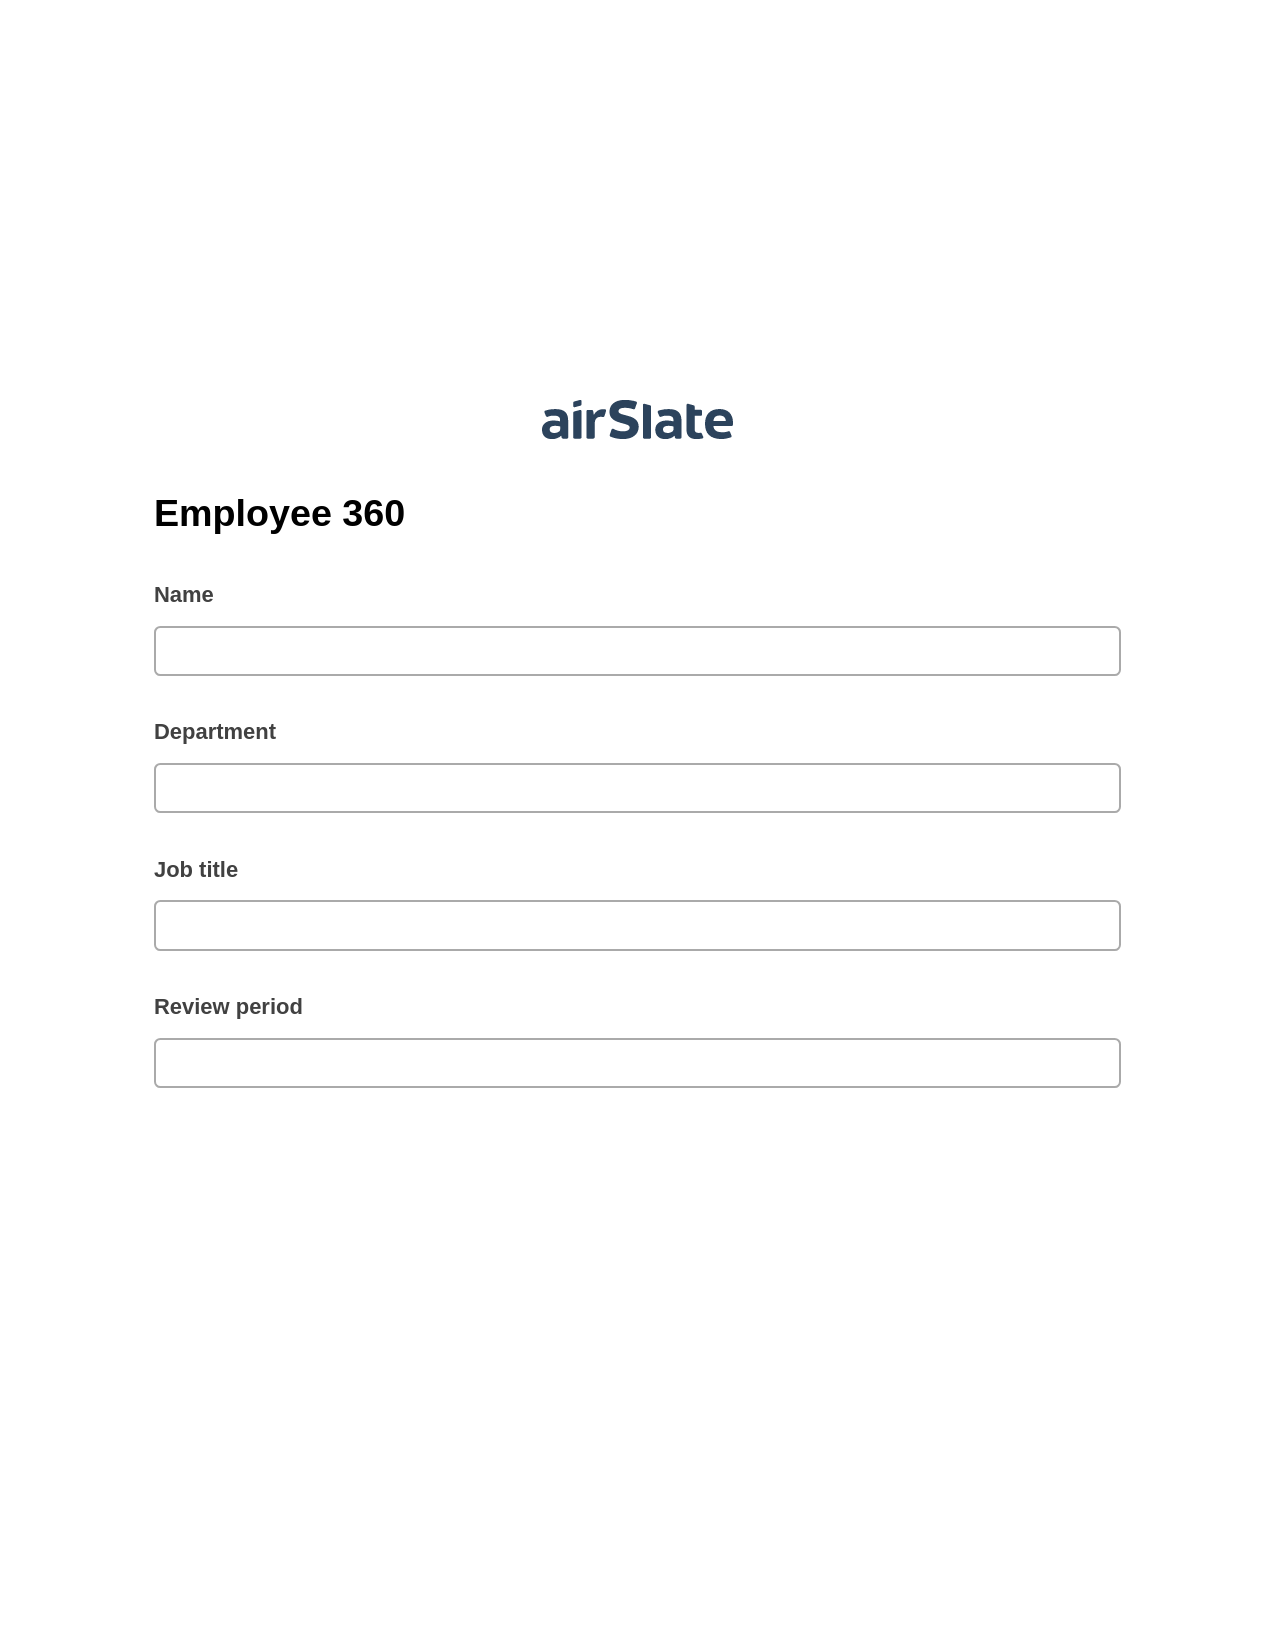 Employee 360 Prefill from NetSuite records, Set signature type addon, Export to Salesforce Record Bot